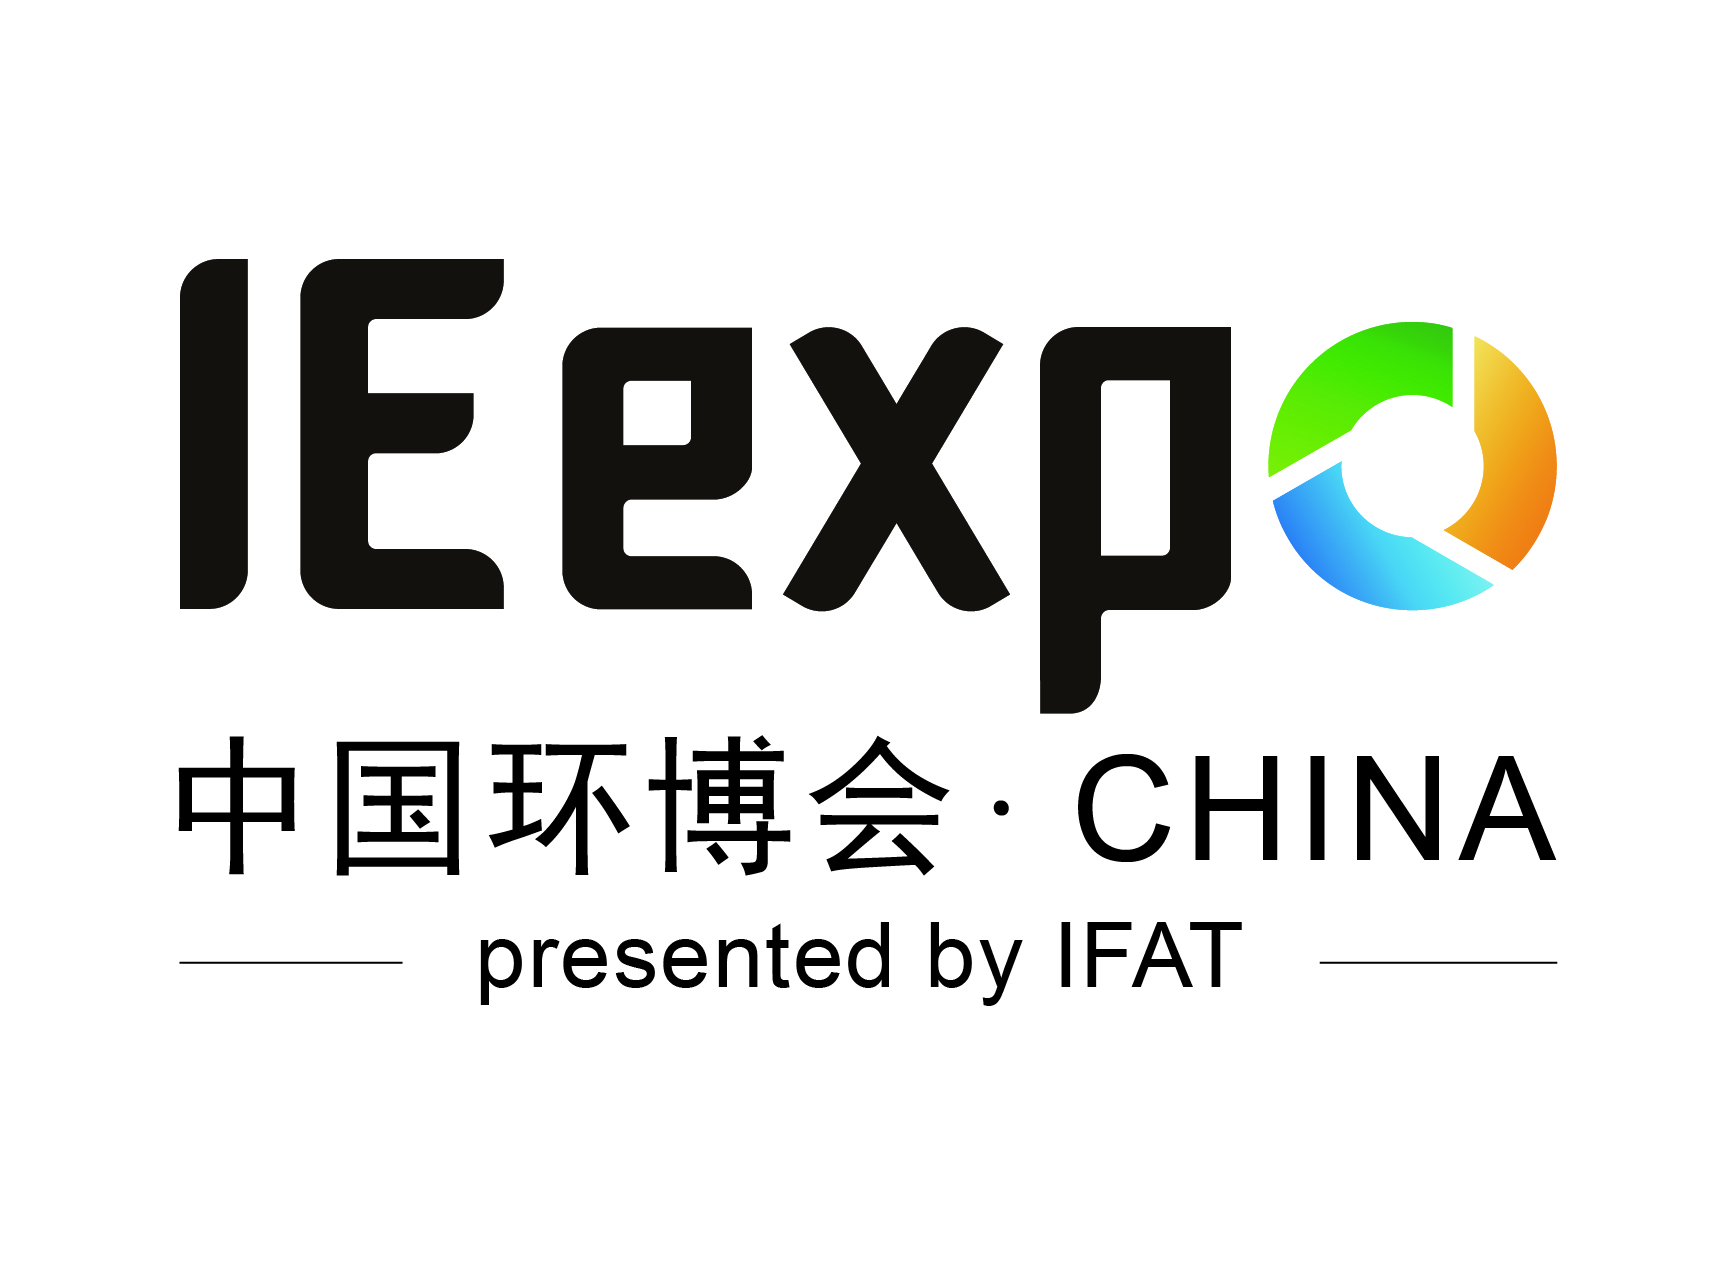 See you at IE Expo Shanghai 2019